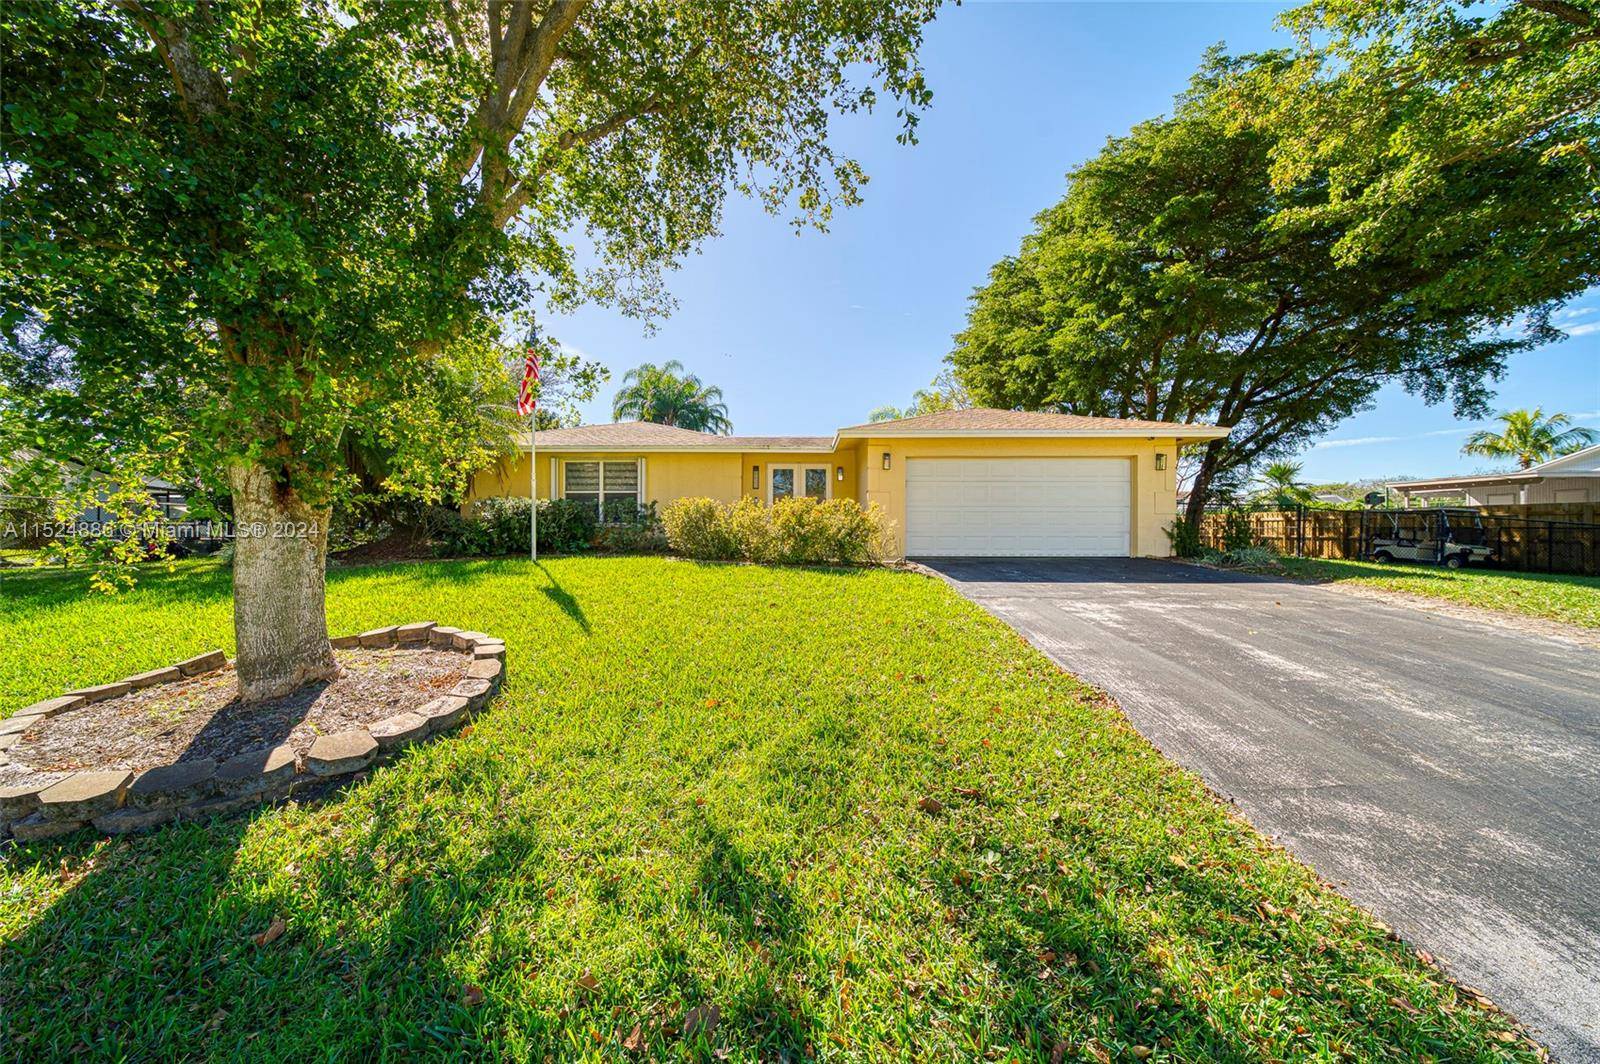 Tastefully Updated 4 bedroom, 2 bathroom home with screened in pool and a 2 car garage located in Palmetto Bay.